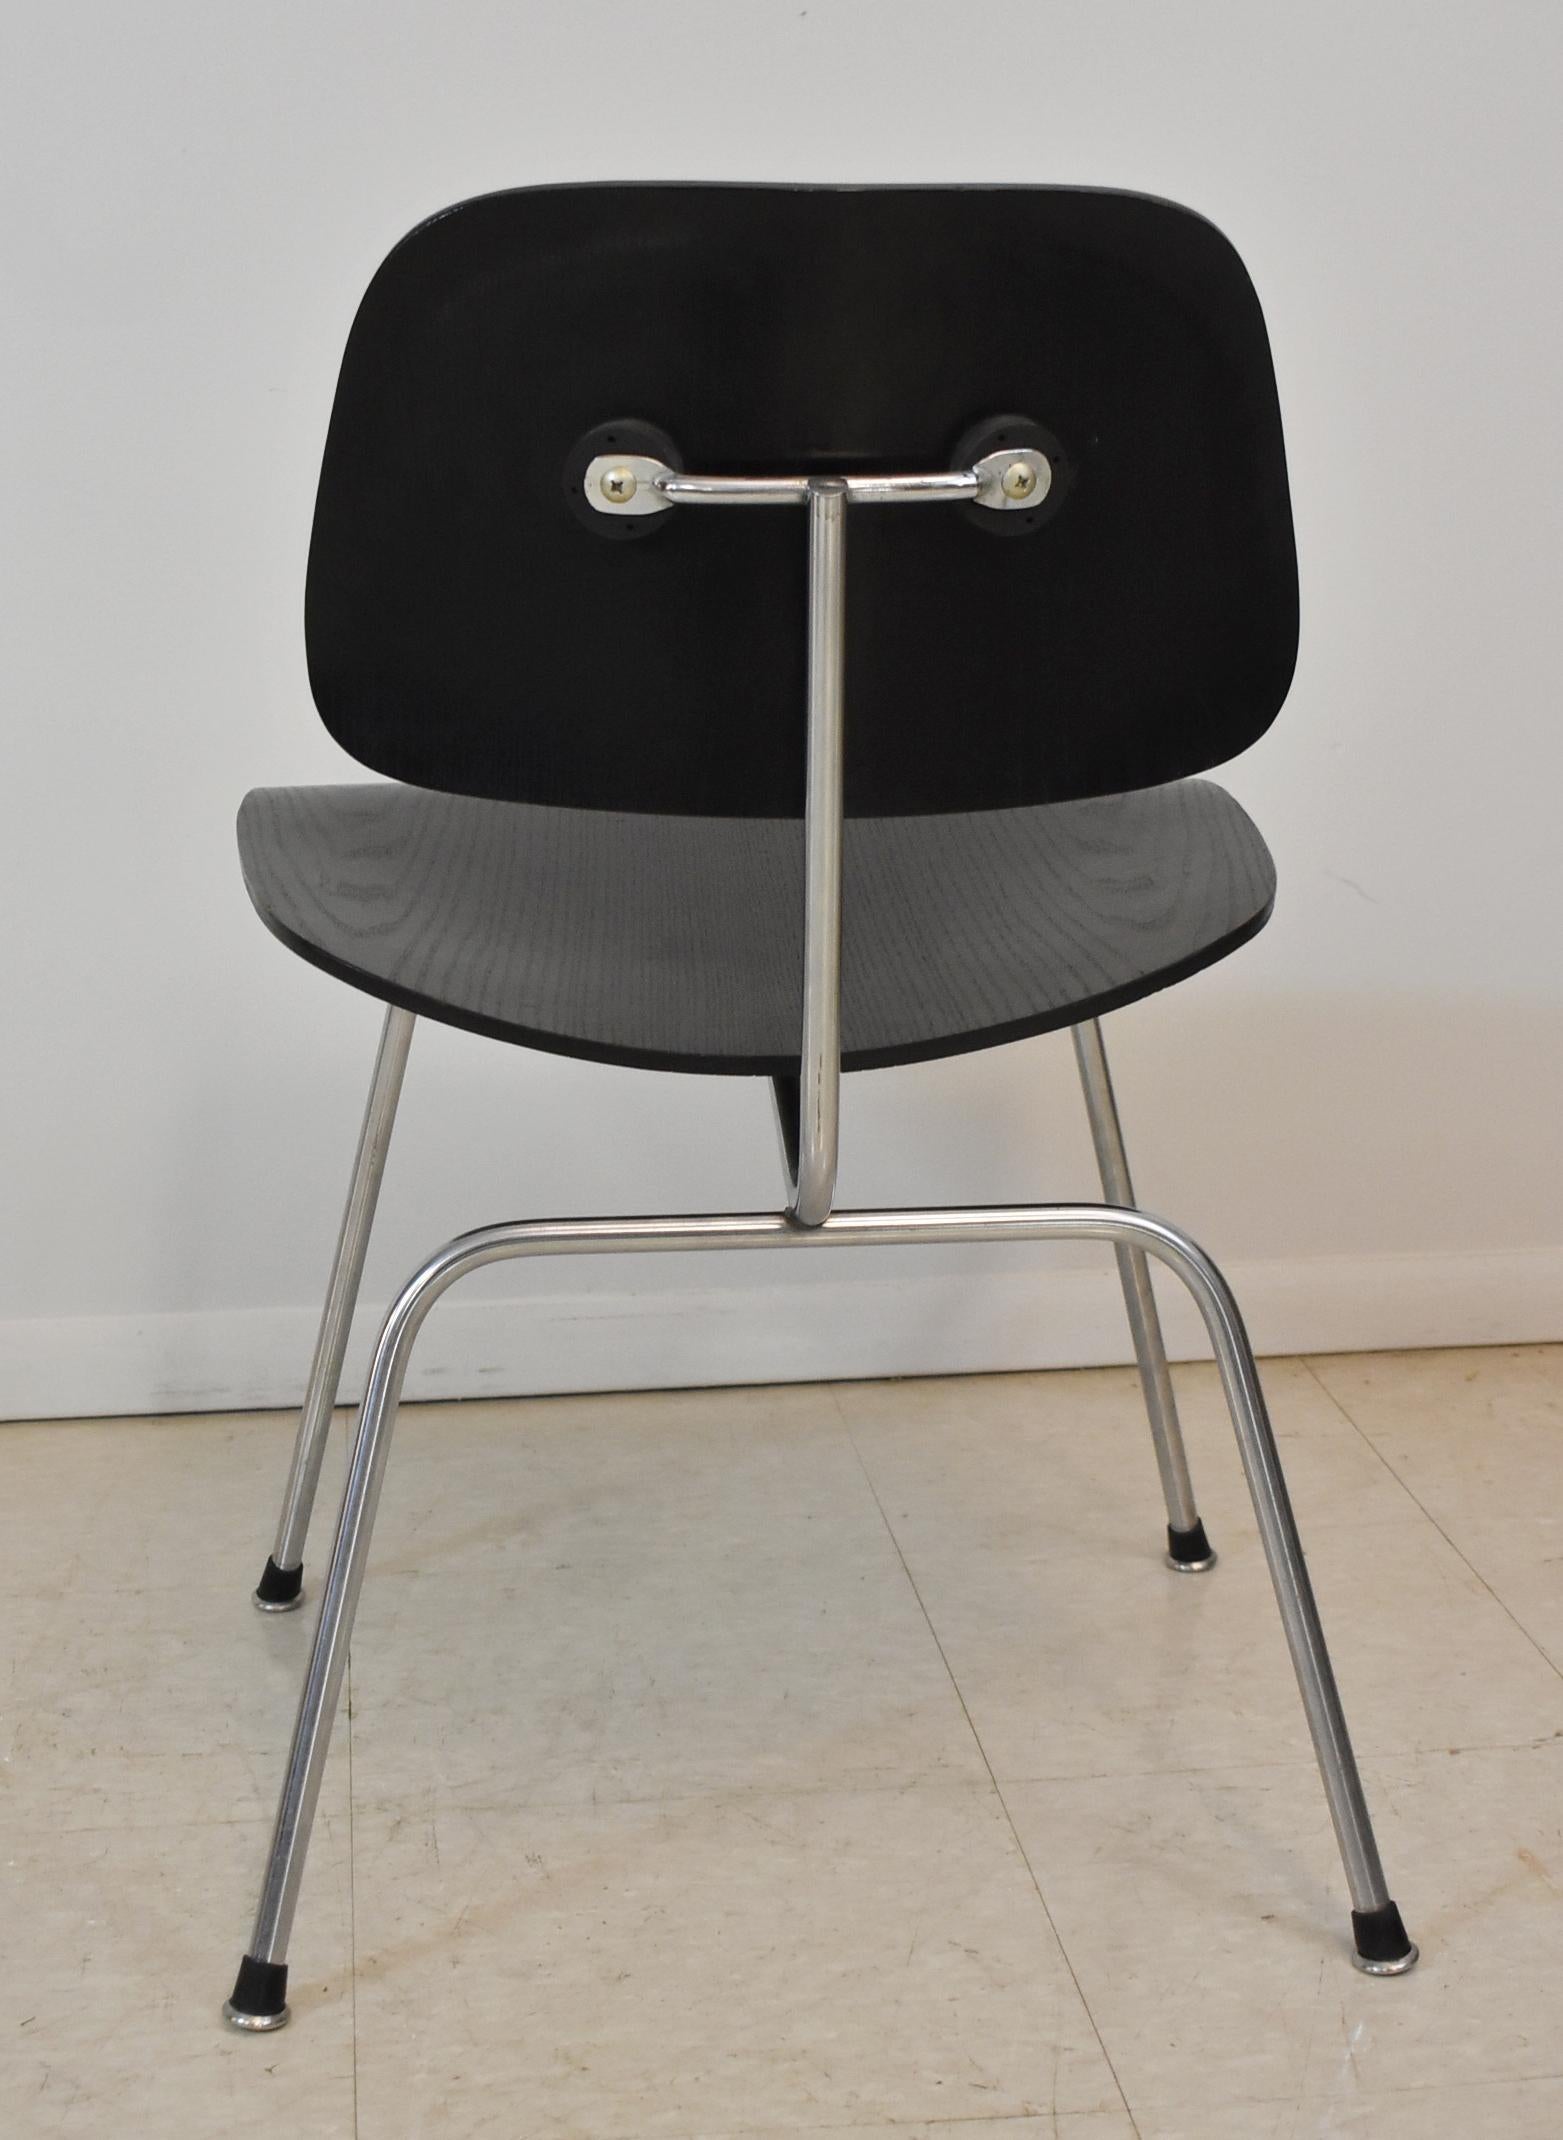 Mid-Century Modern ebonized wood and chrome chair by DCM Eames. Very nice condition. Dimensions: 21